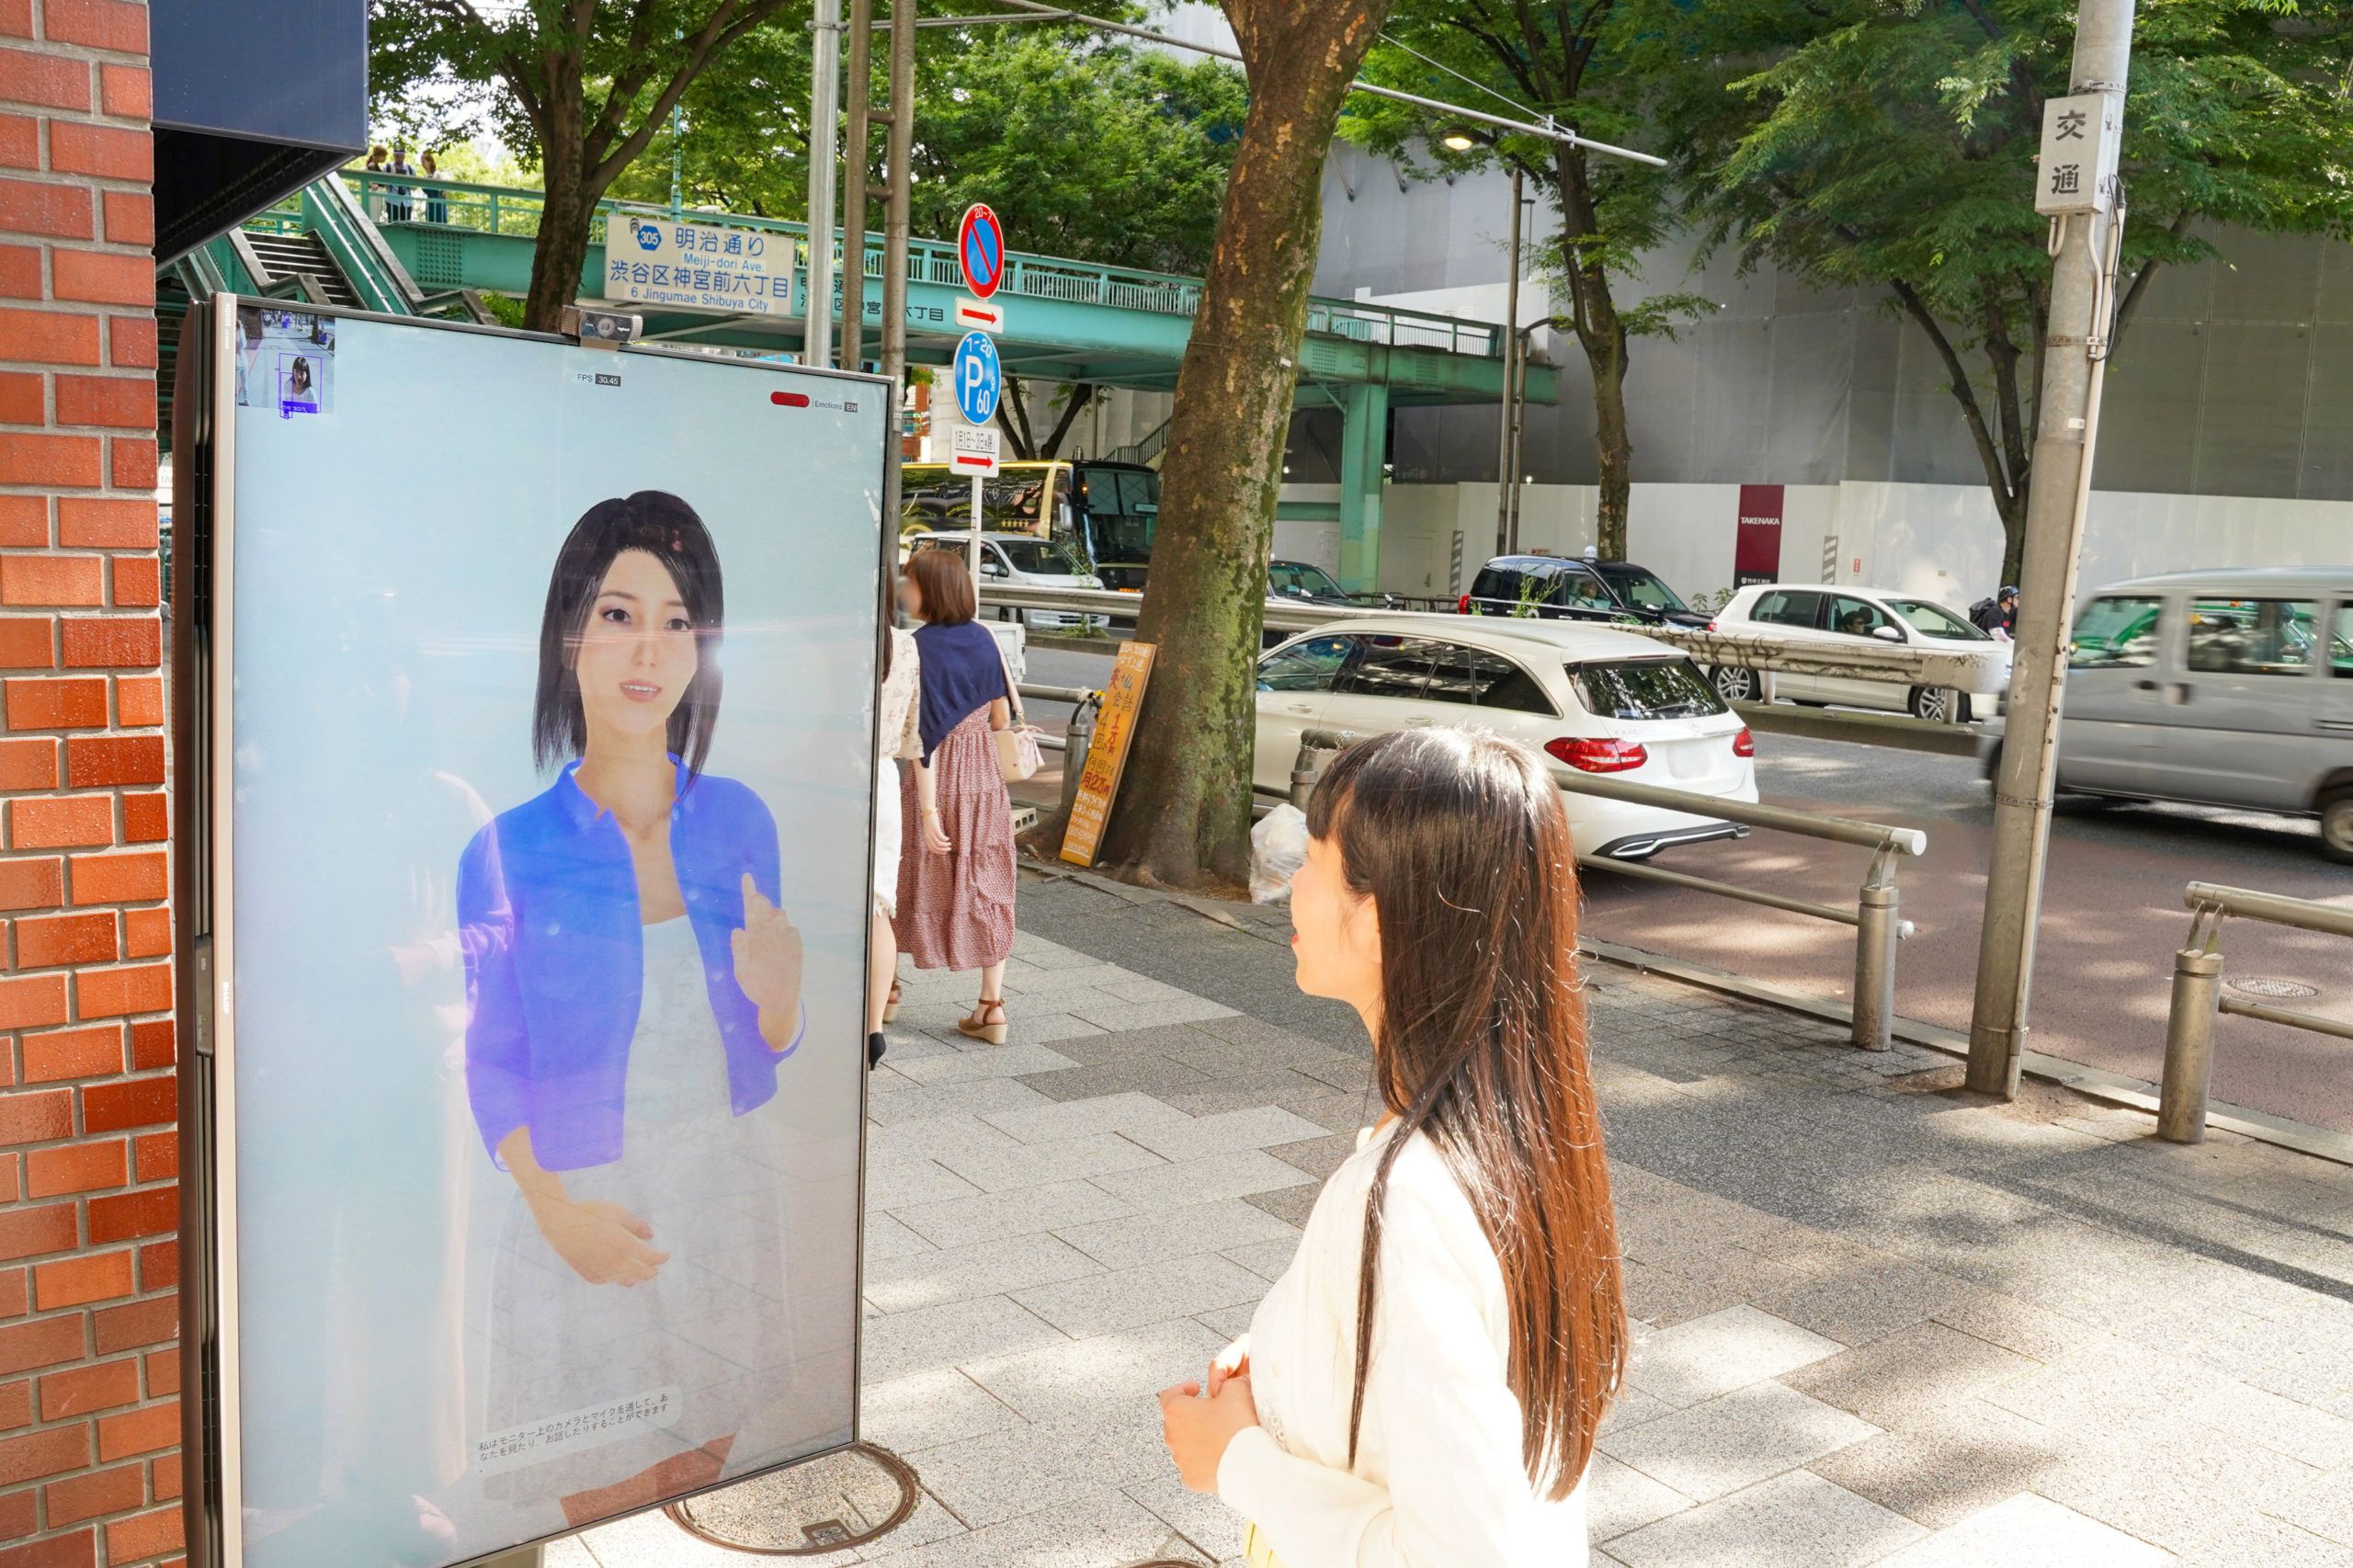 Couger develops Human-like AI assistant that communicates like a human. Testing its potential as a next-generation interface on digital signage around train stations.